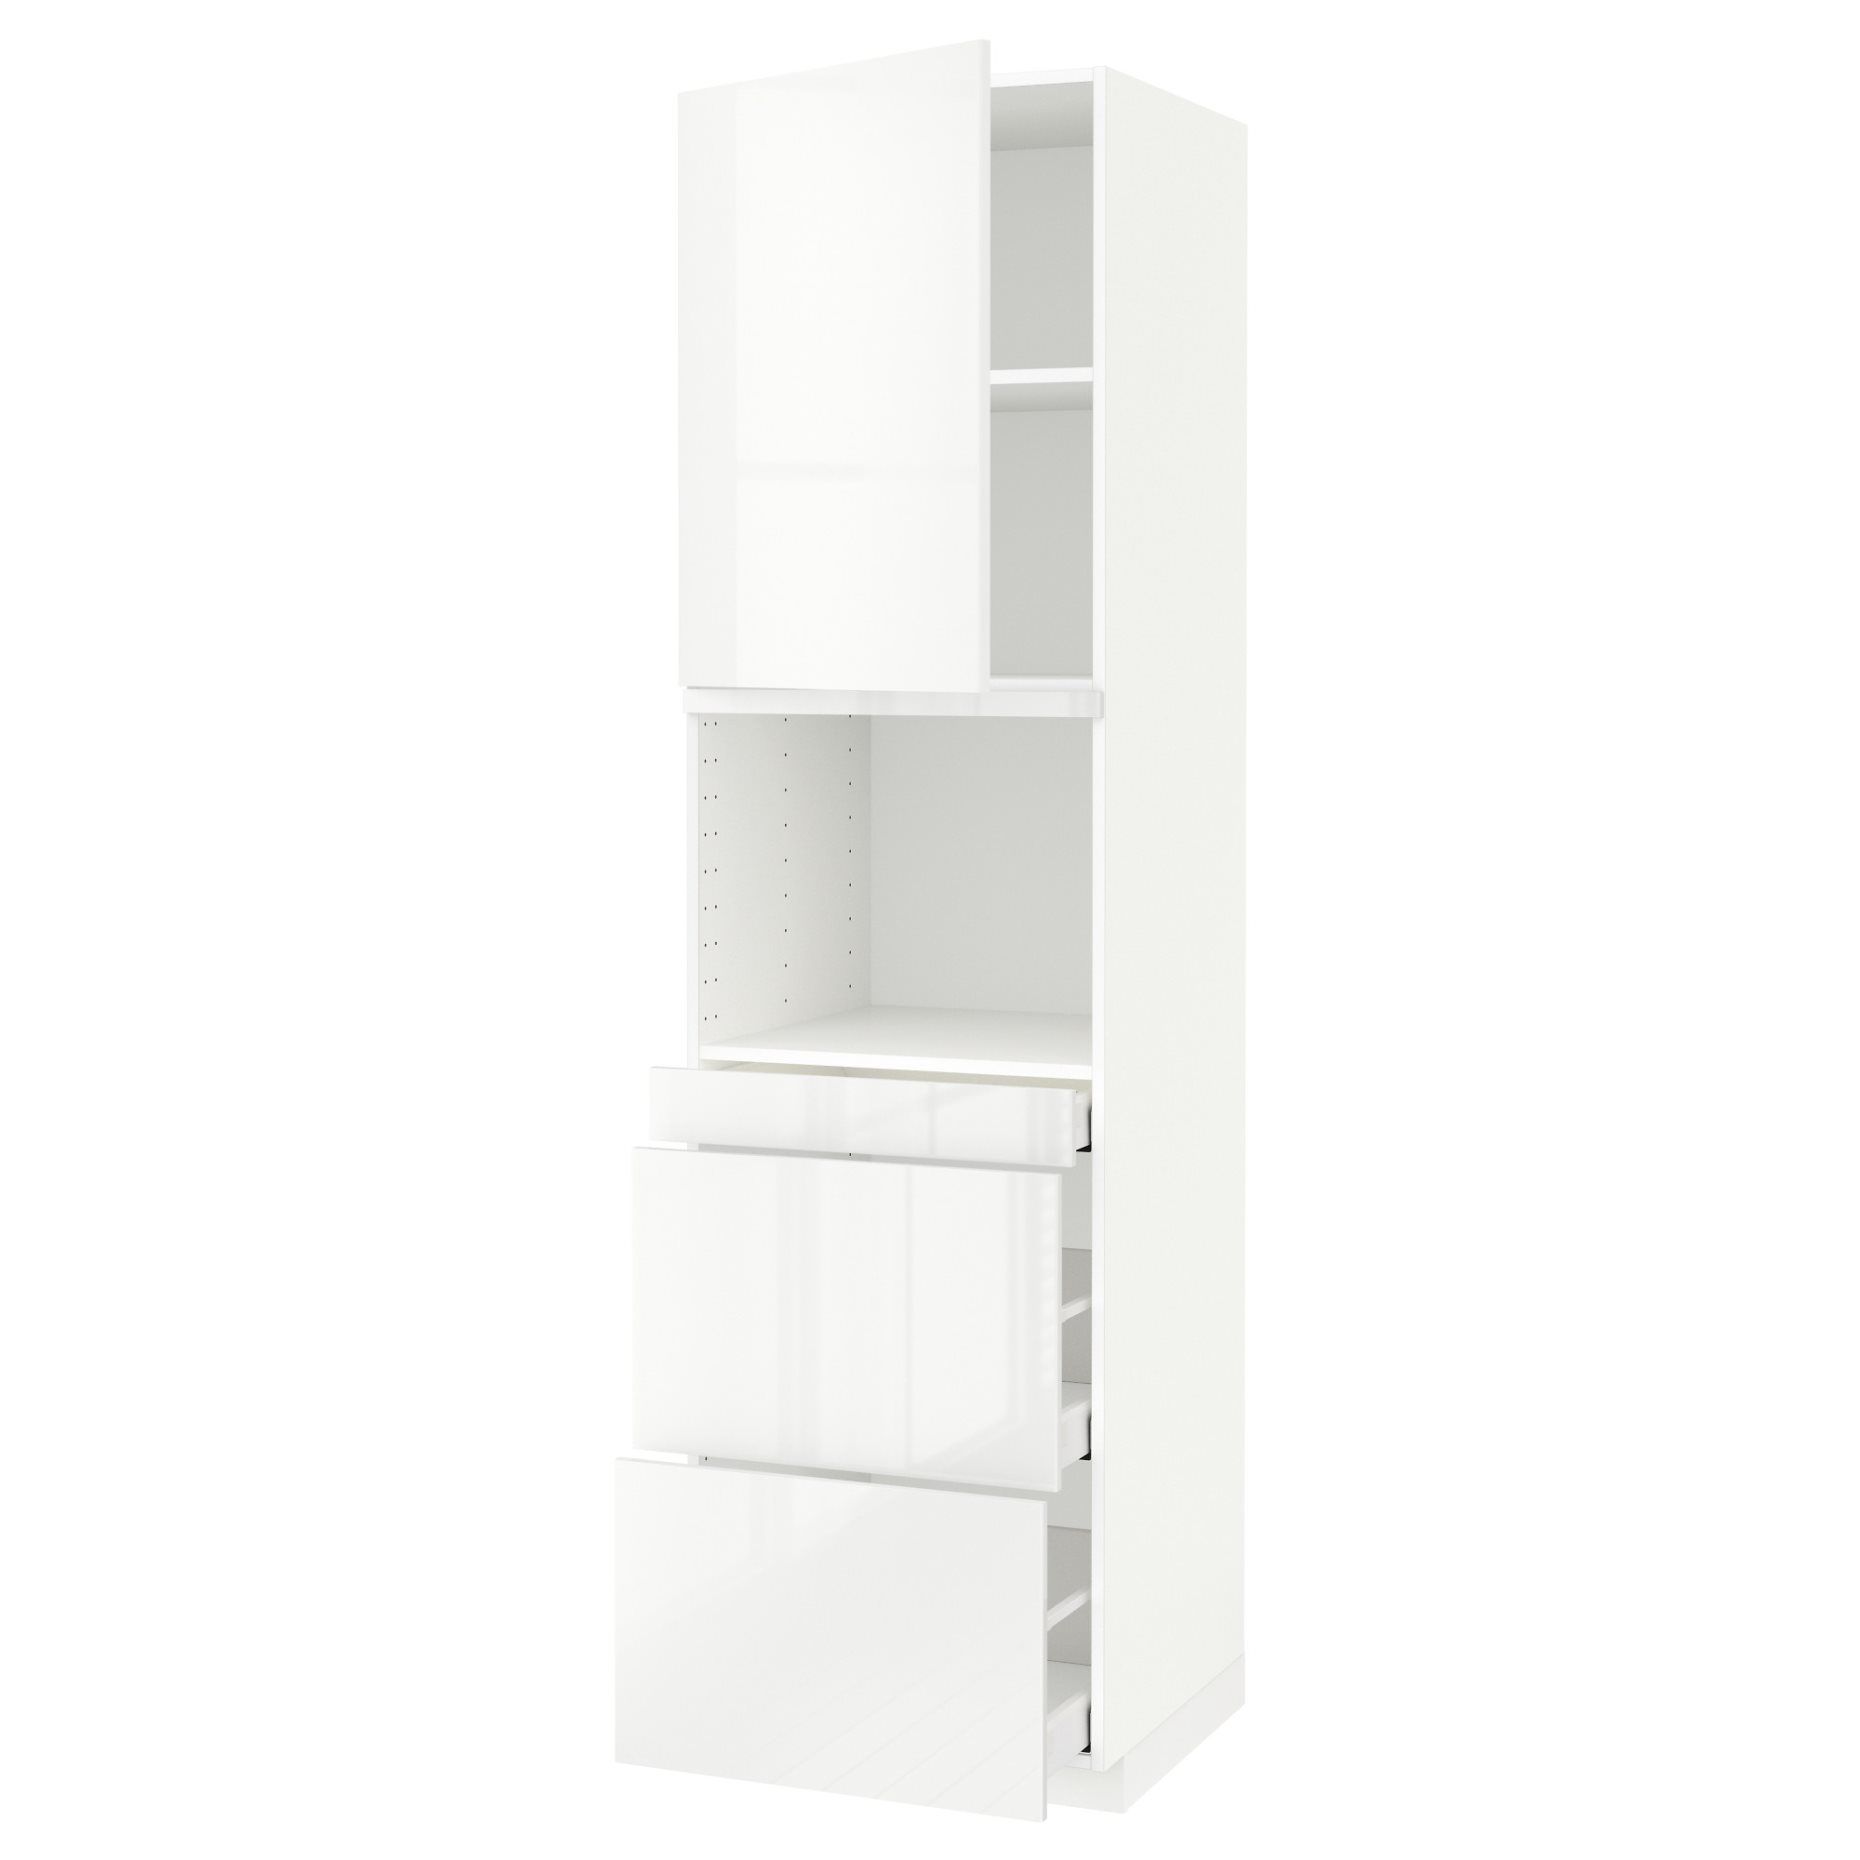 METOD/MAXIMERA, high cabinet for microwave combi with door/3 drawers, 60x60x220 cm, 694.689.48